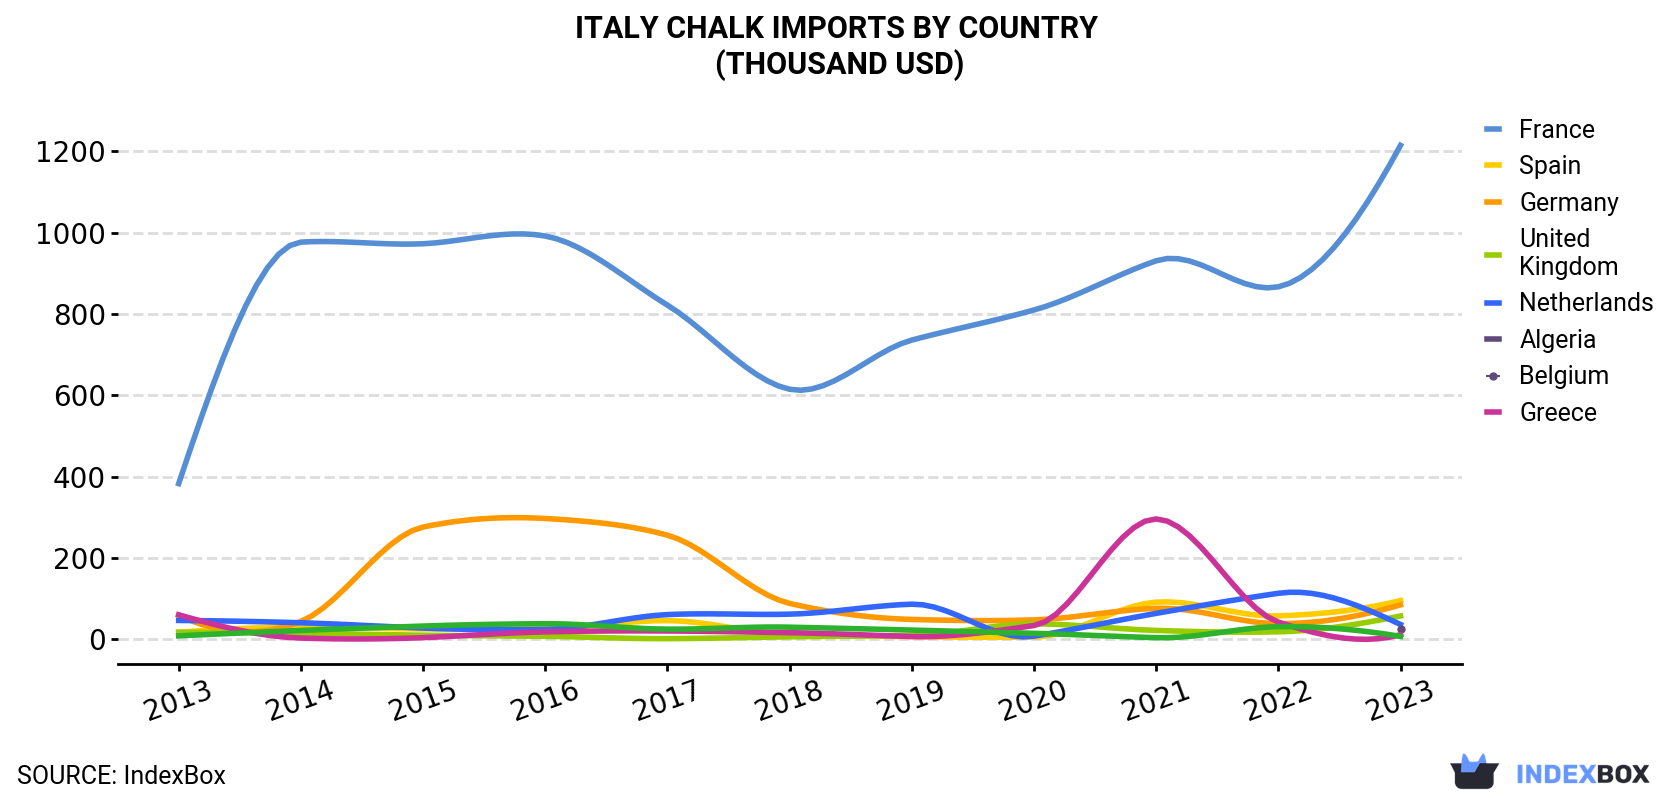 Italy Chalk Imports By Country (Thousand USD)